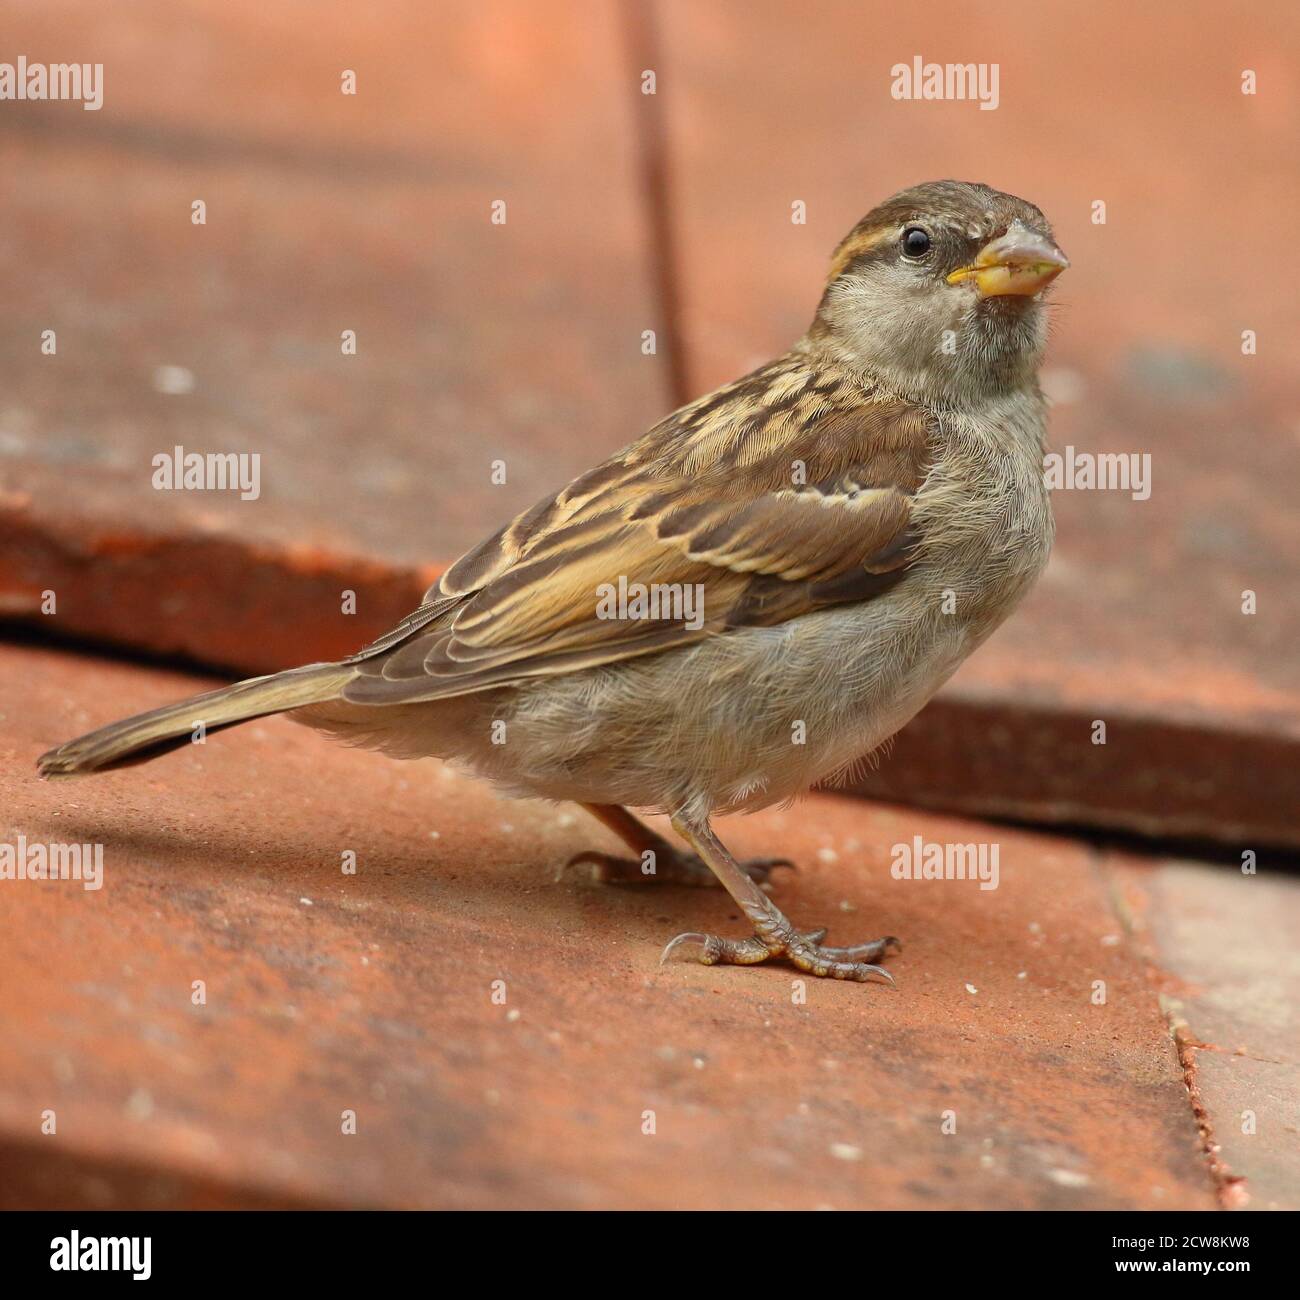 Female House Sparrow (Passer domesticus) on clay roof tiles. Taken August 2020. Stock Photo